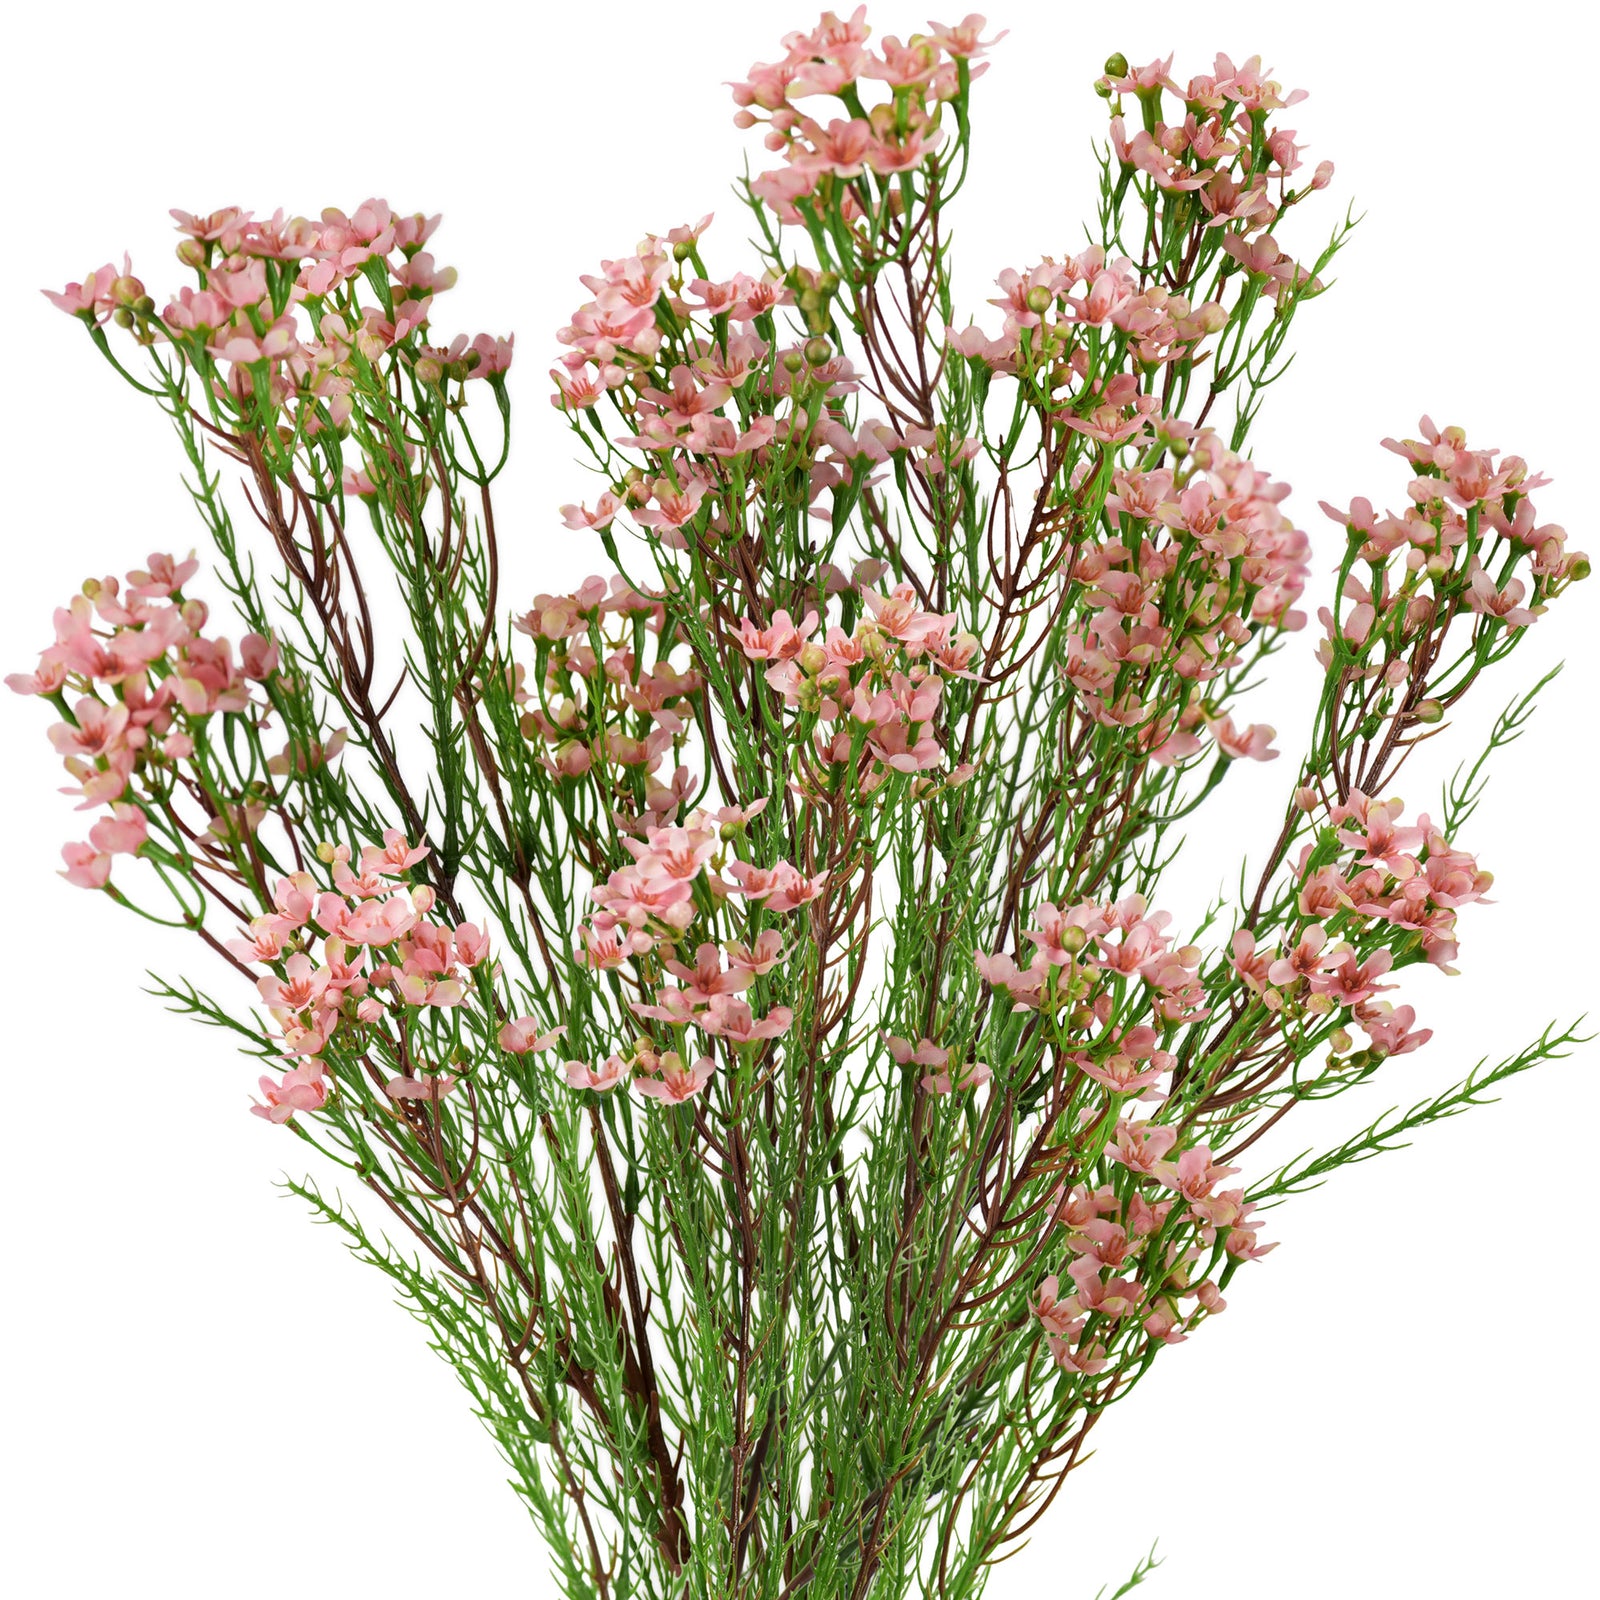 Coral Pink Timeless Charm Wax Flowers, Long Stem Artificial Silk Flowers 6 Stems 2.6ft (78cm) Tall